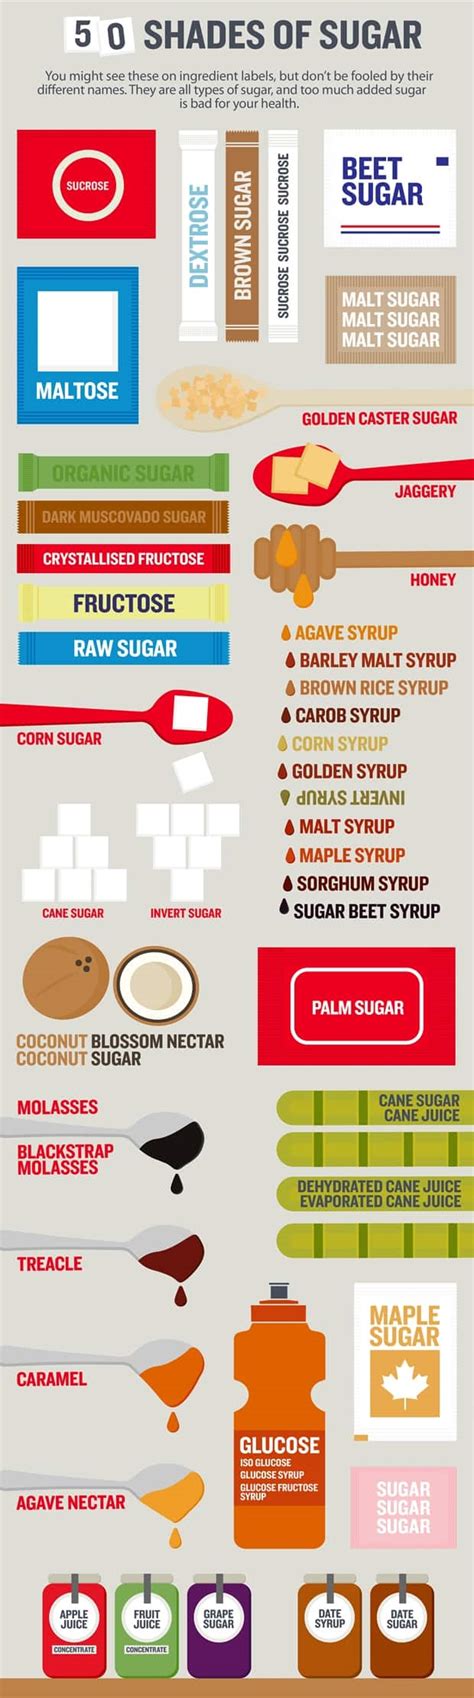 50 Shades Of Sugar Daily Infographic